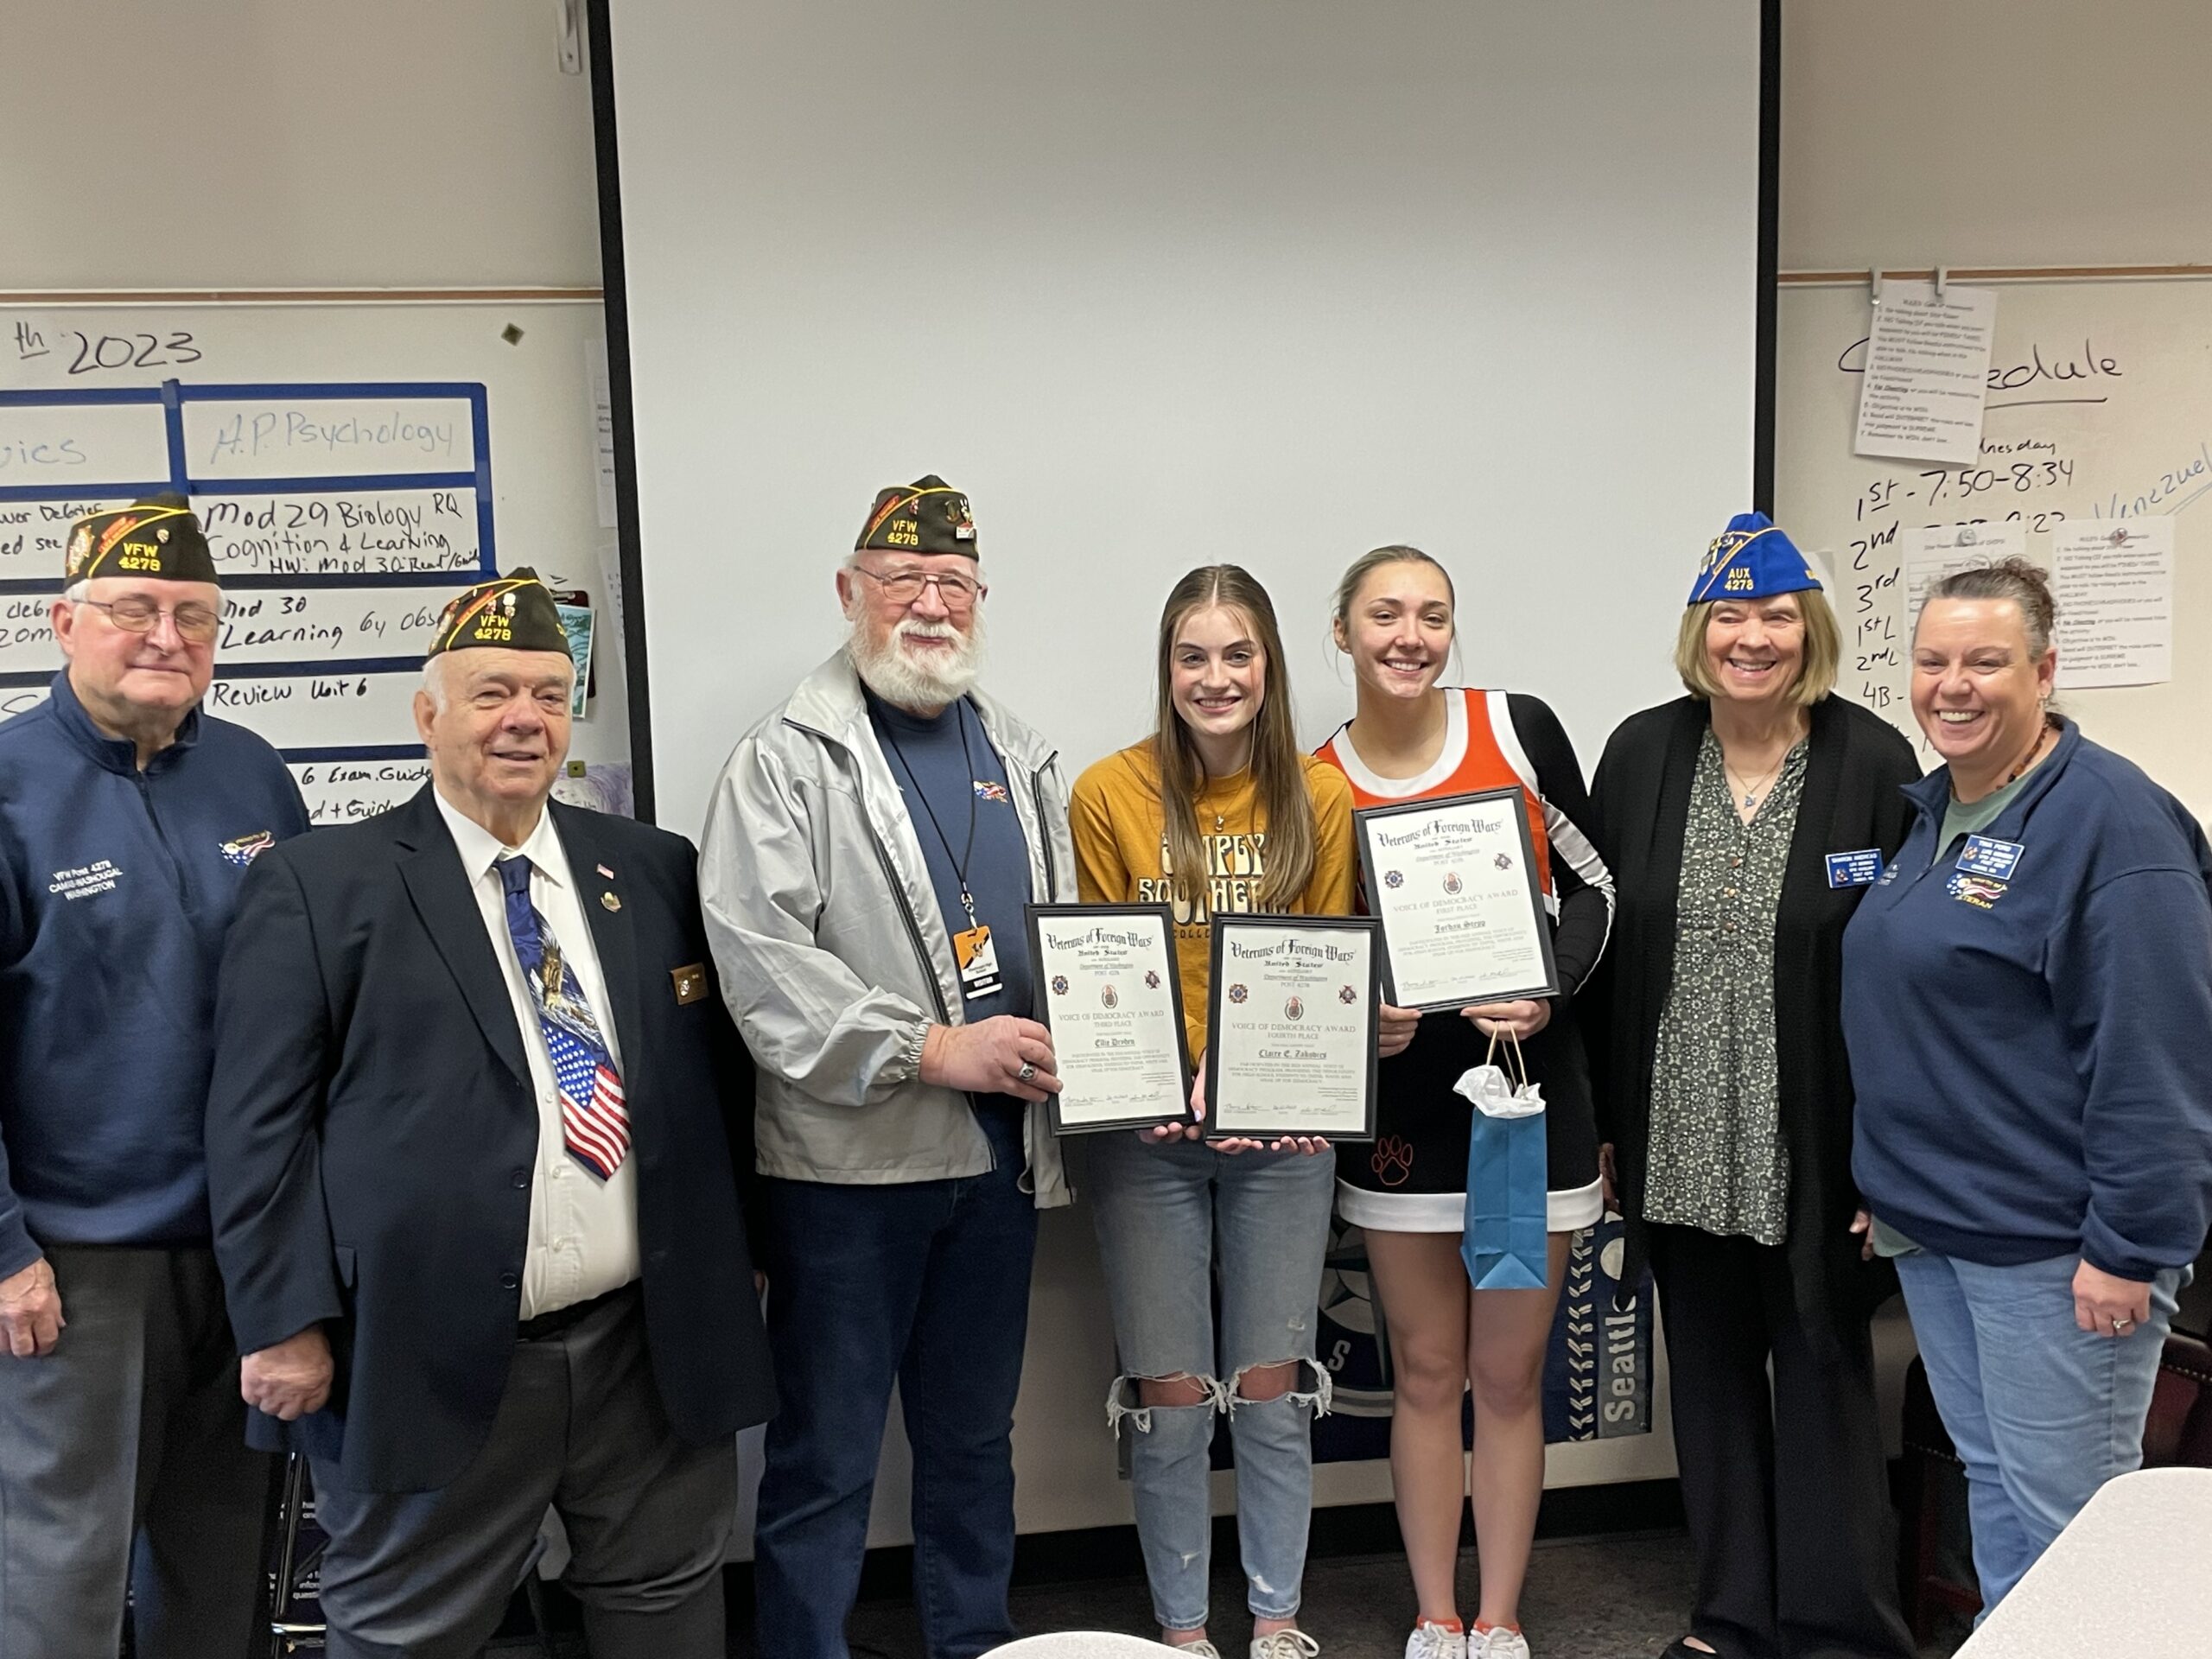 VFW members present awards to Washougal High School students